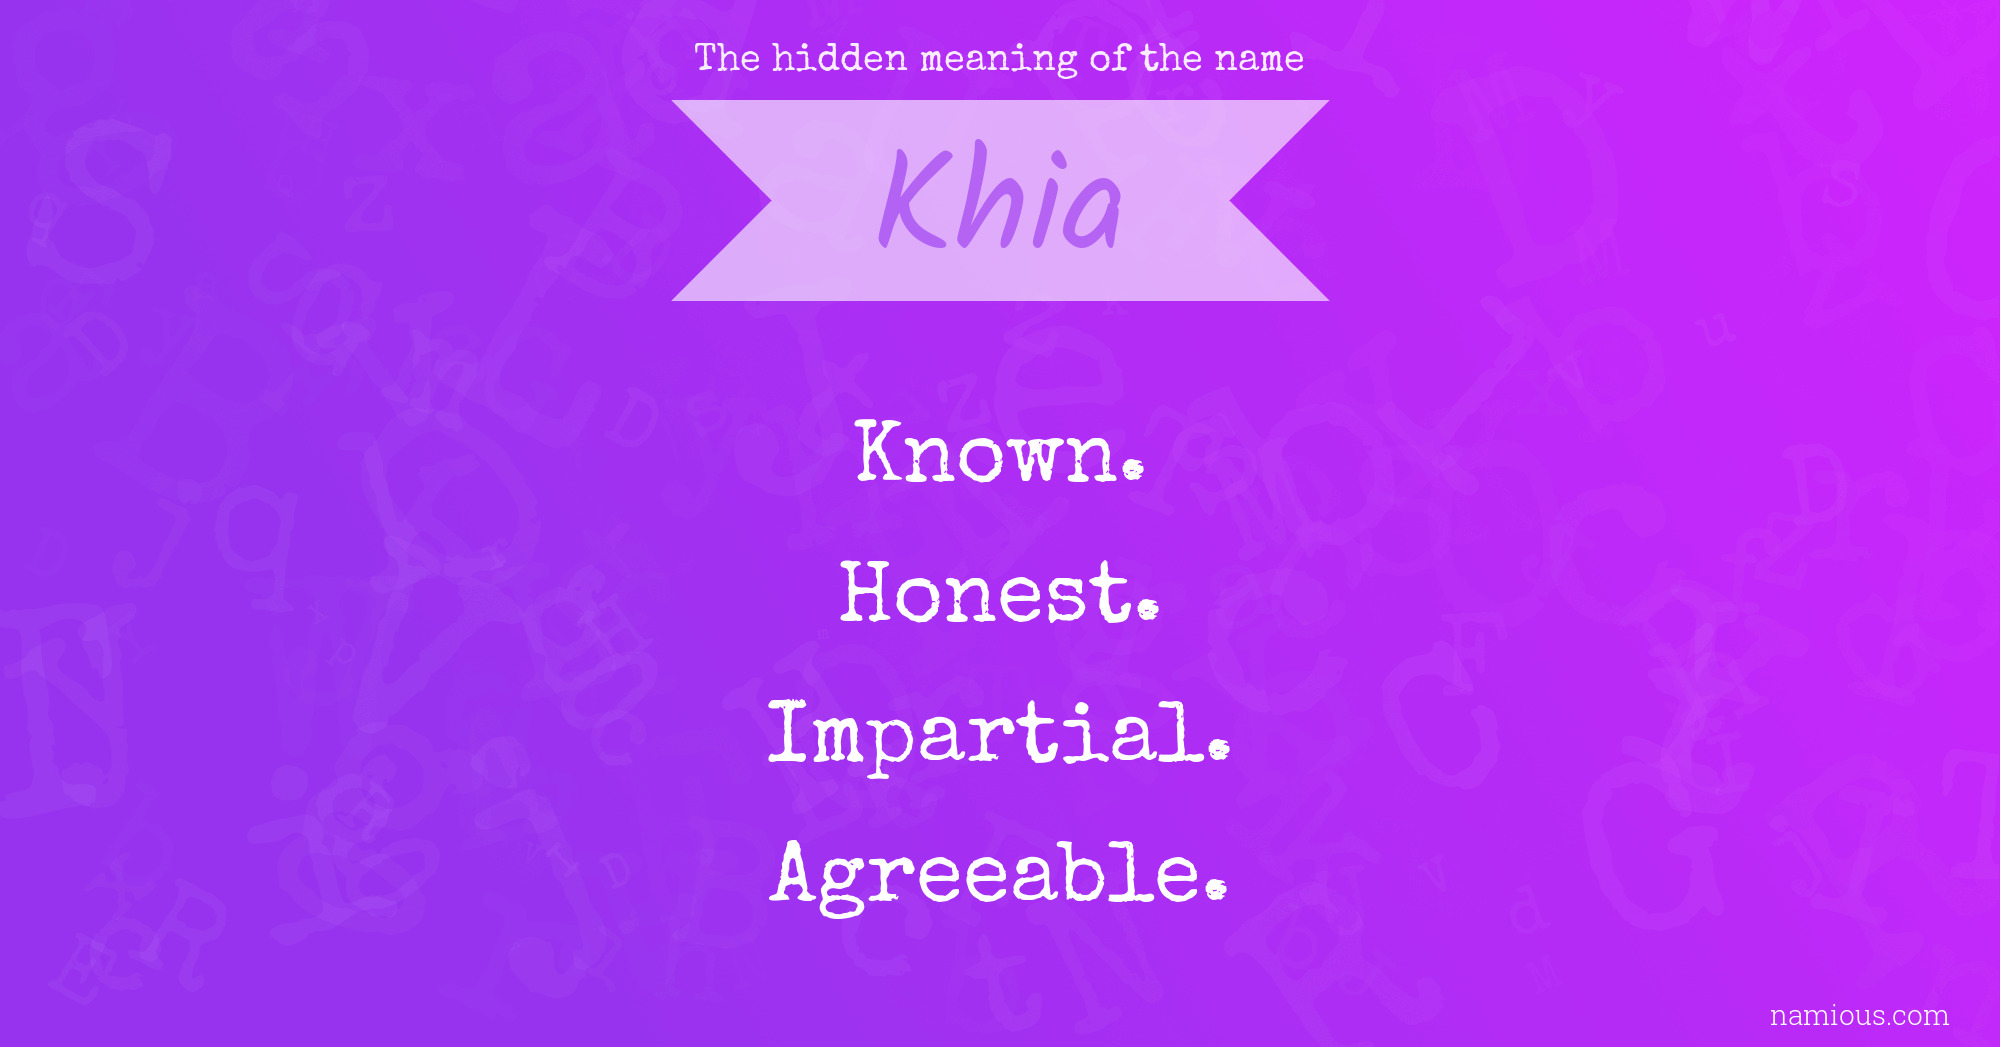 The hidden meaning of the name Khia